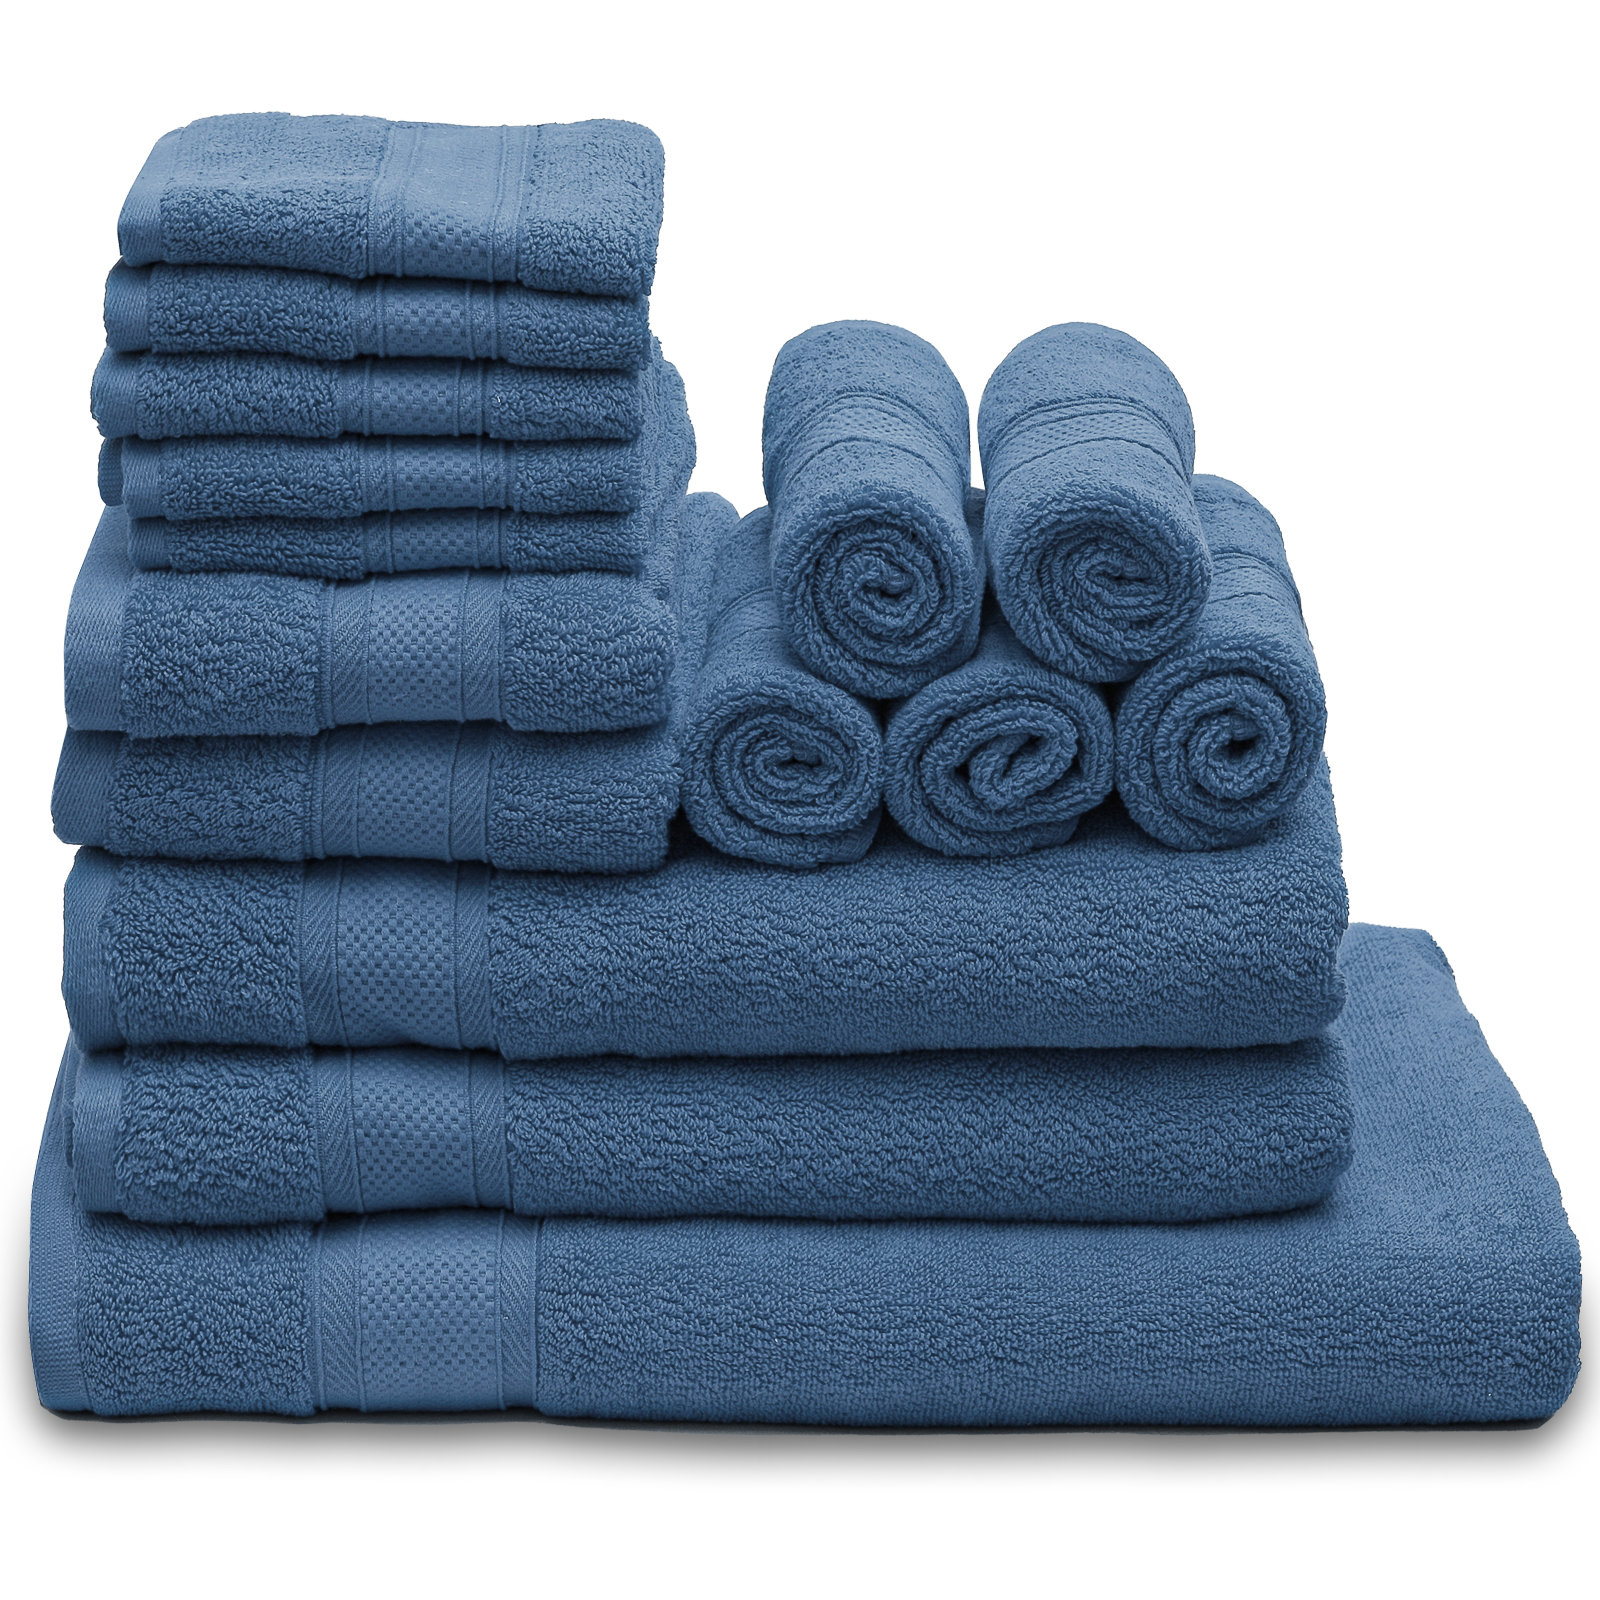 100% Cotton 6-Piece Towel Set - 6 Bath Towels Super Soft, High Quality, High-Absorbent,  and Fade-Resistant - 54 x 27 - (White) 